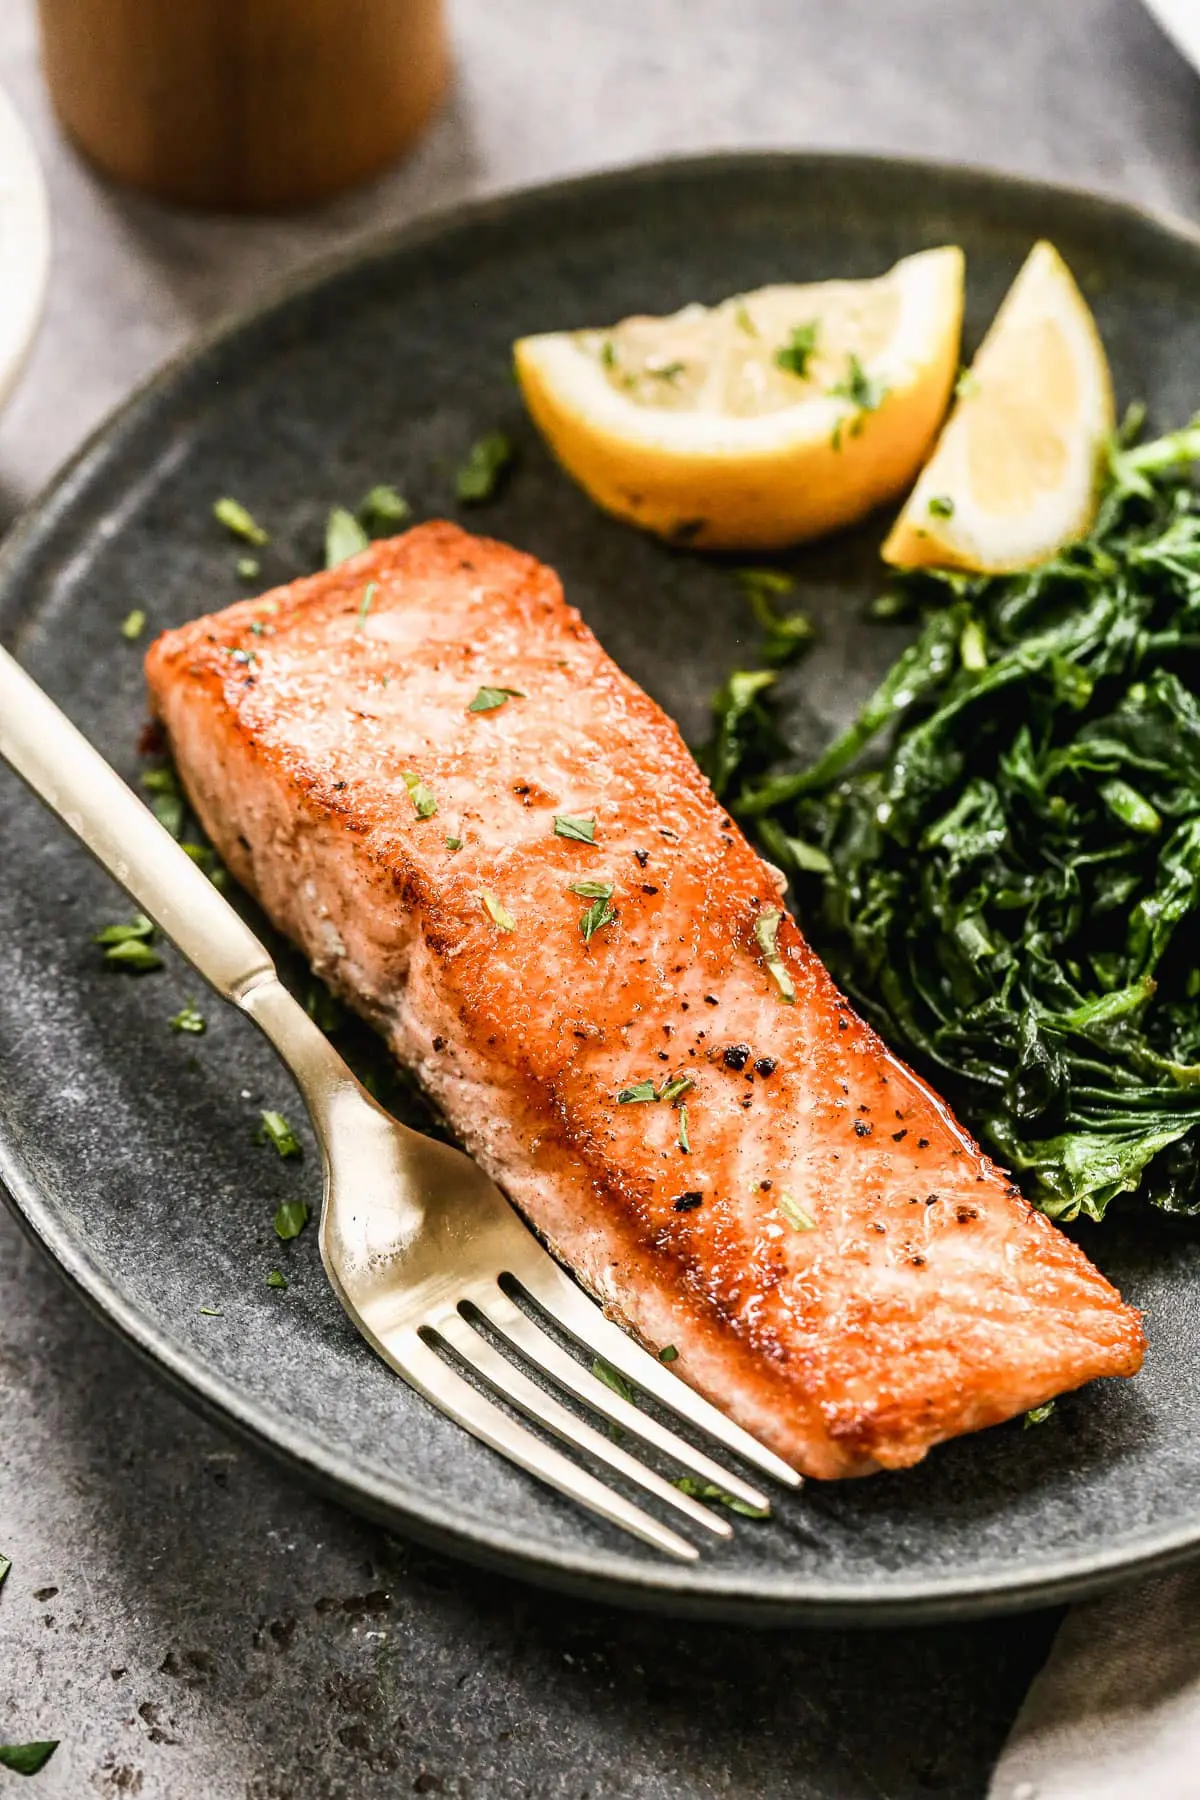 how long to pan fry smoked salmon - How long does it take to pan fry salmon